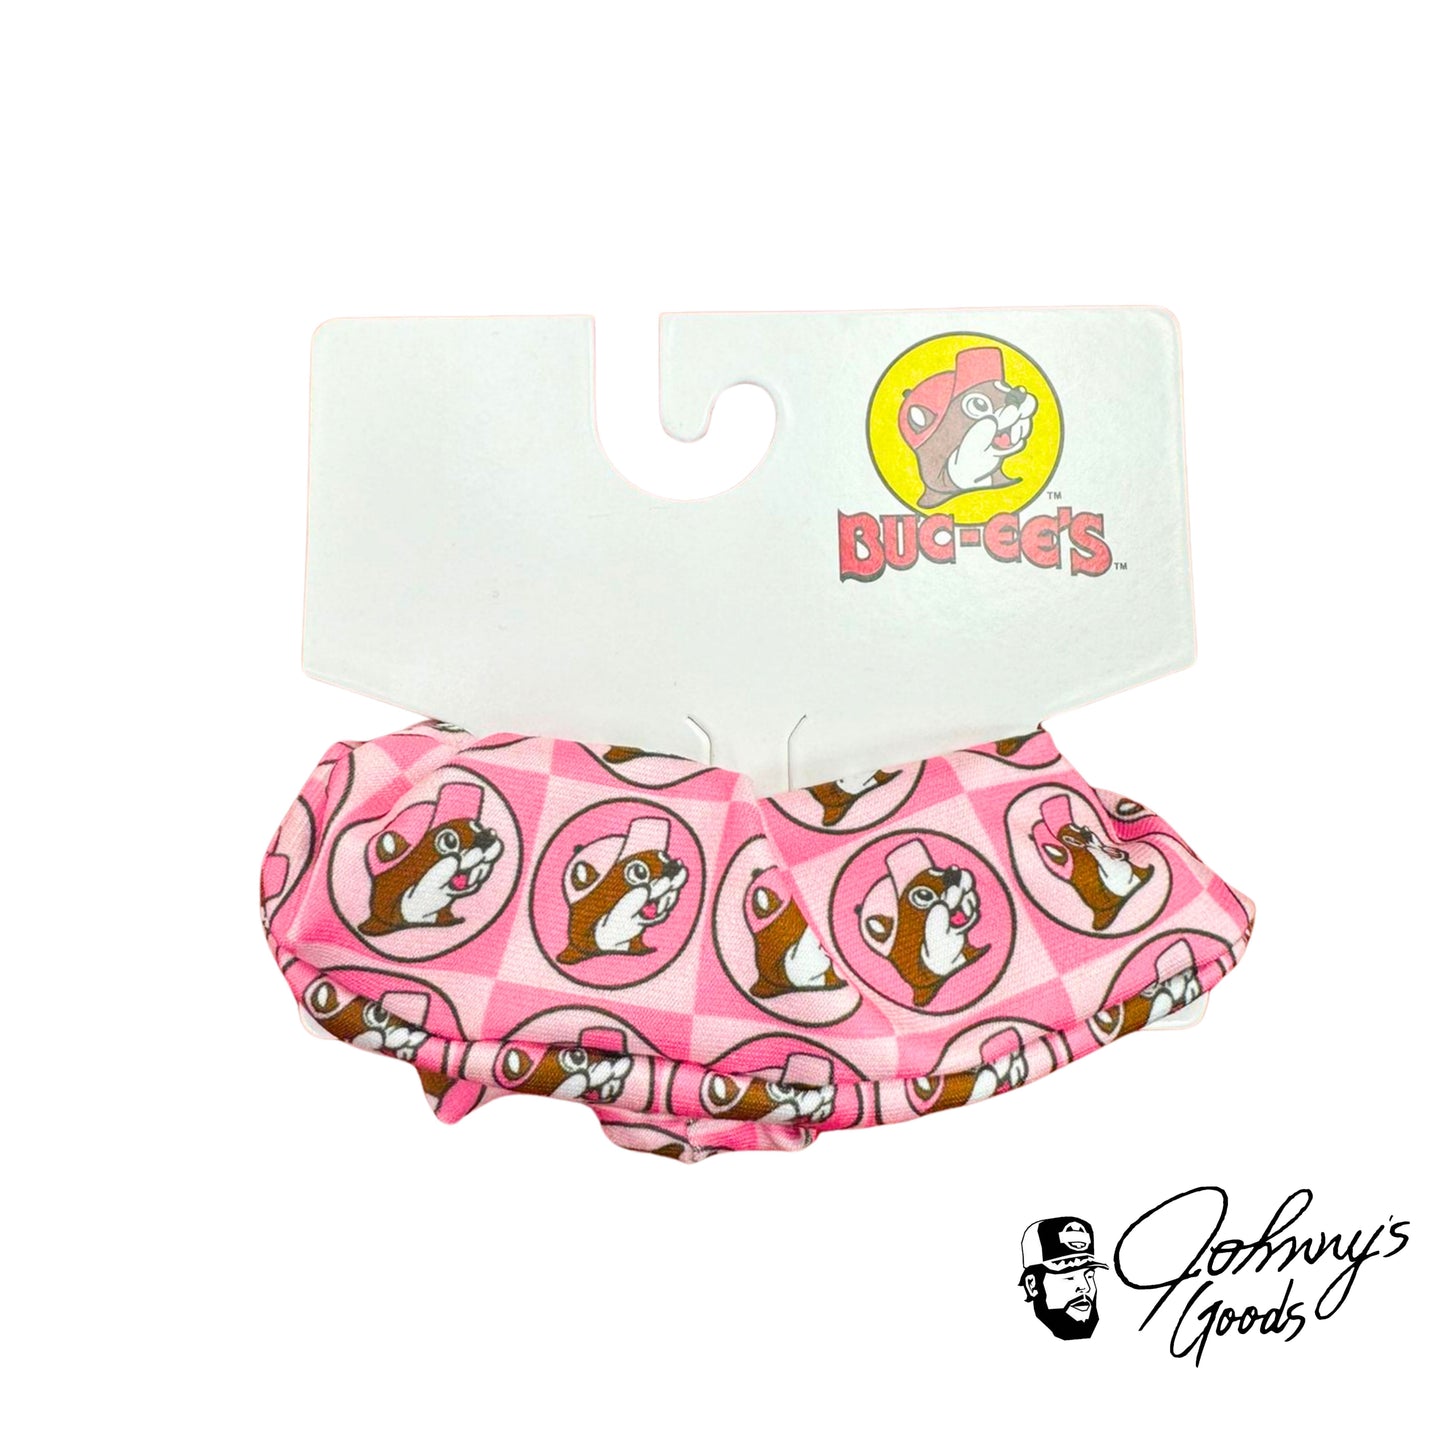 Buc-ee's Hair Accessories Bow Tie and Scrunch buc ees buc ee's bucees buccees buc-ees